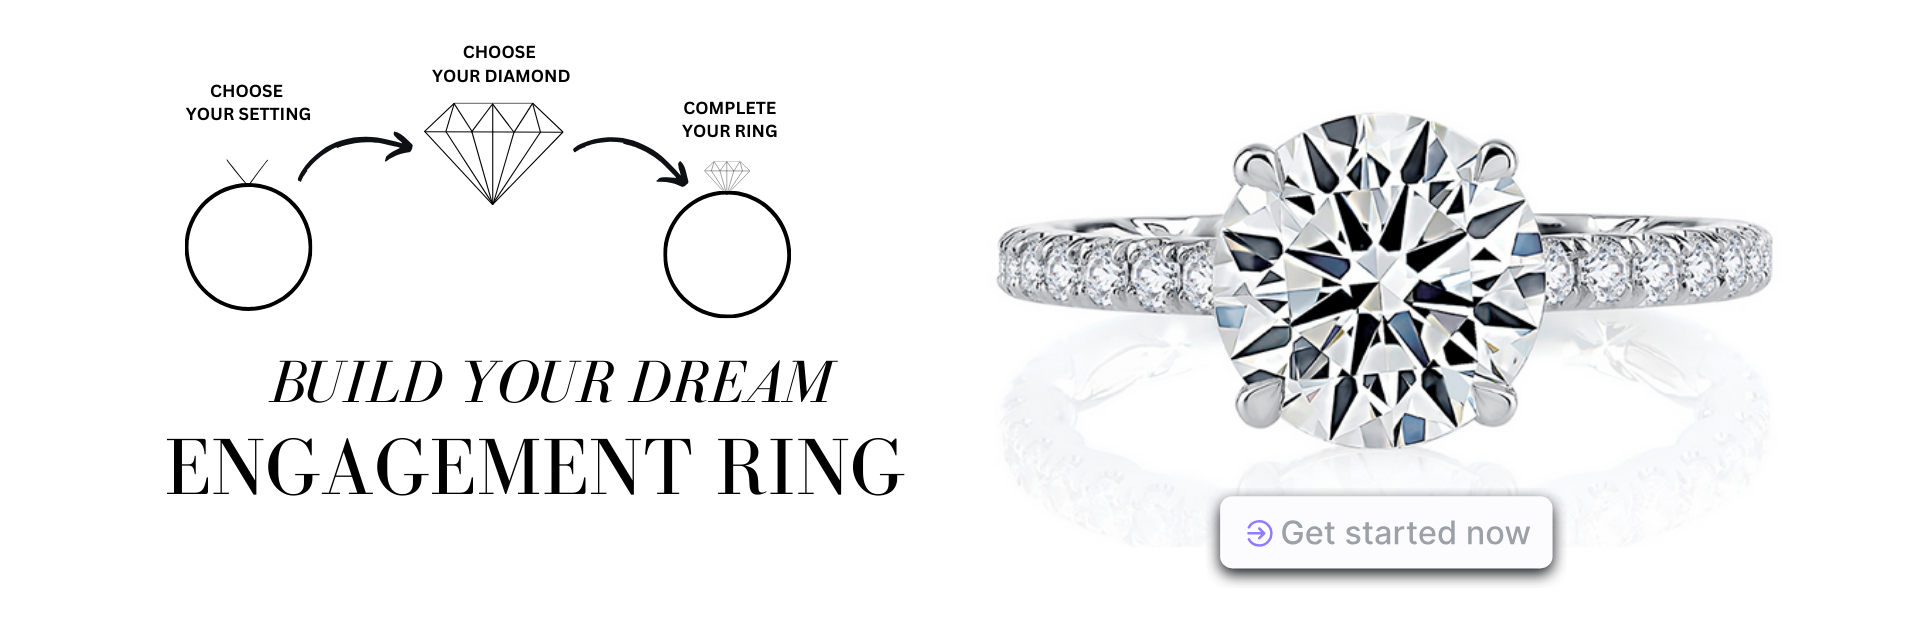 /build your ring